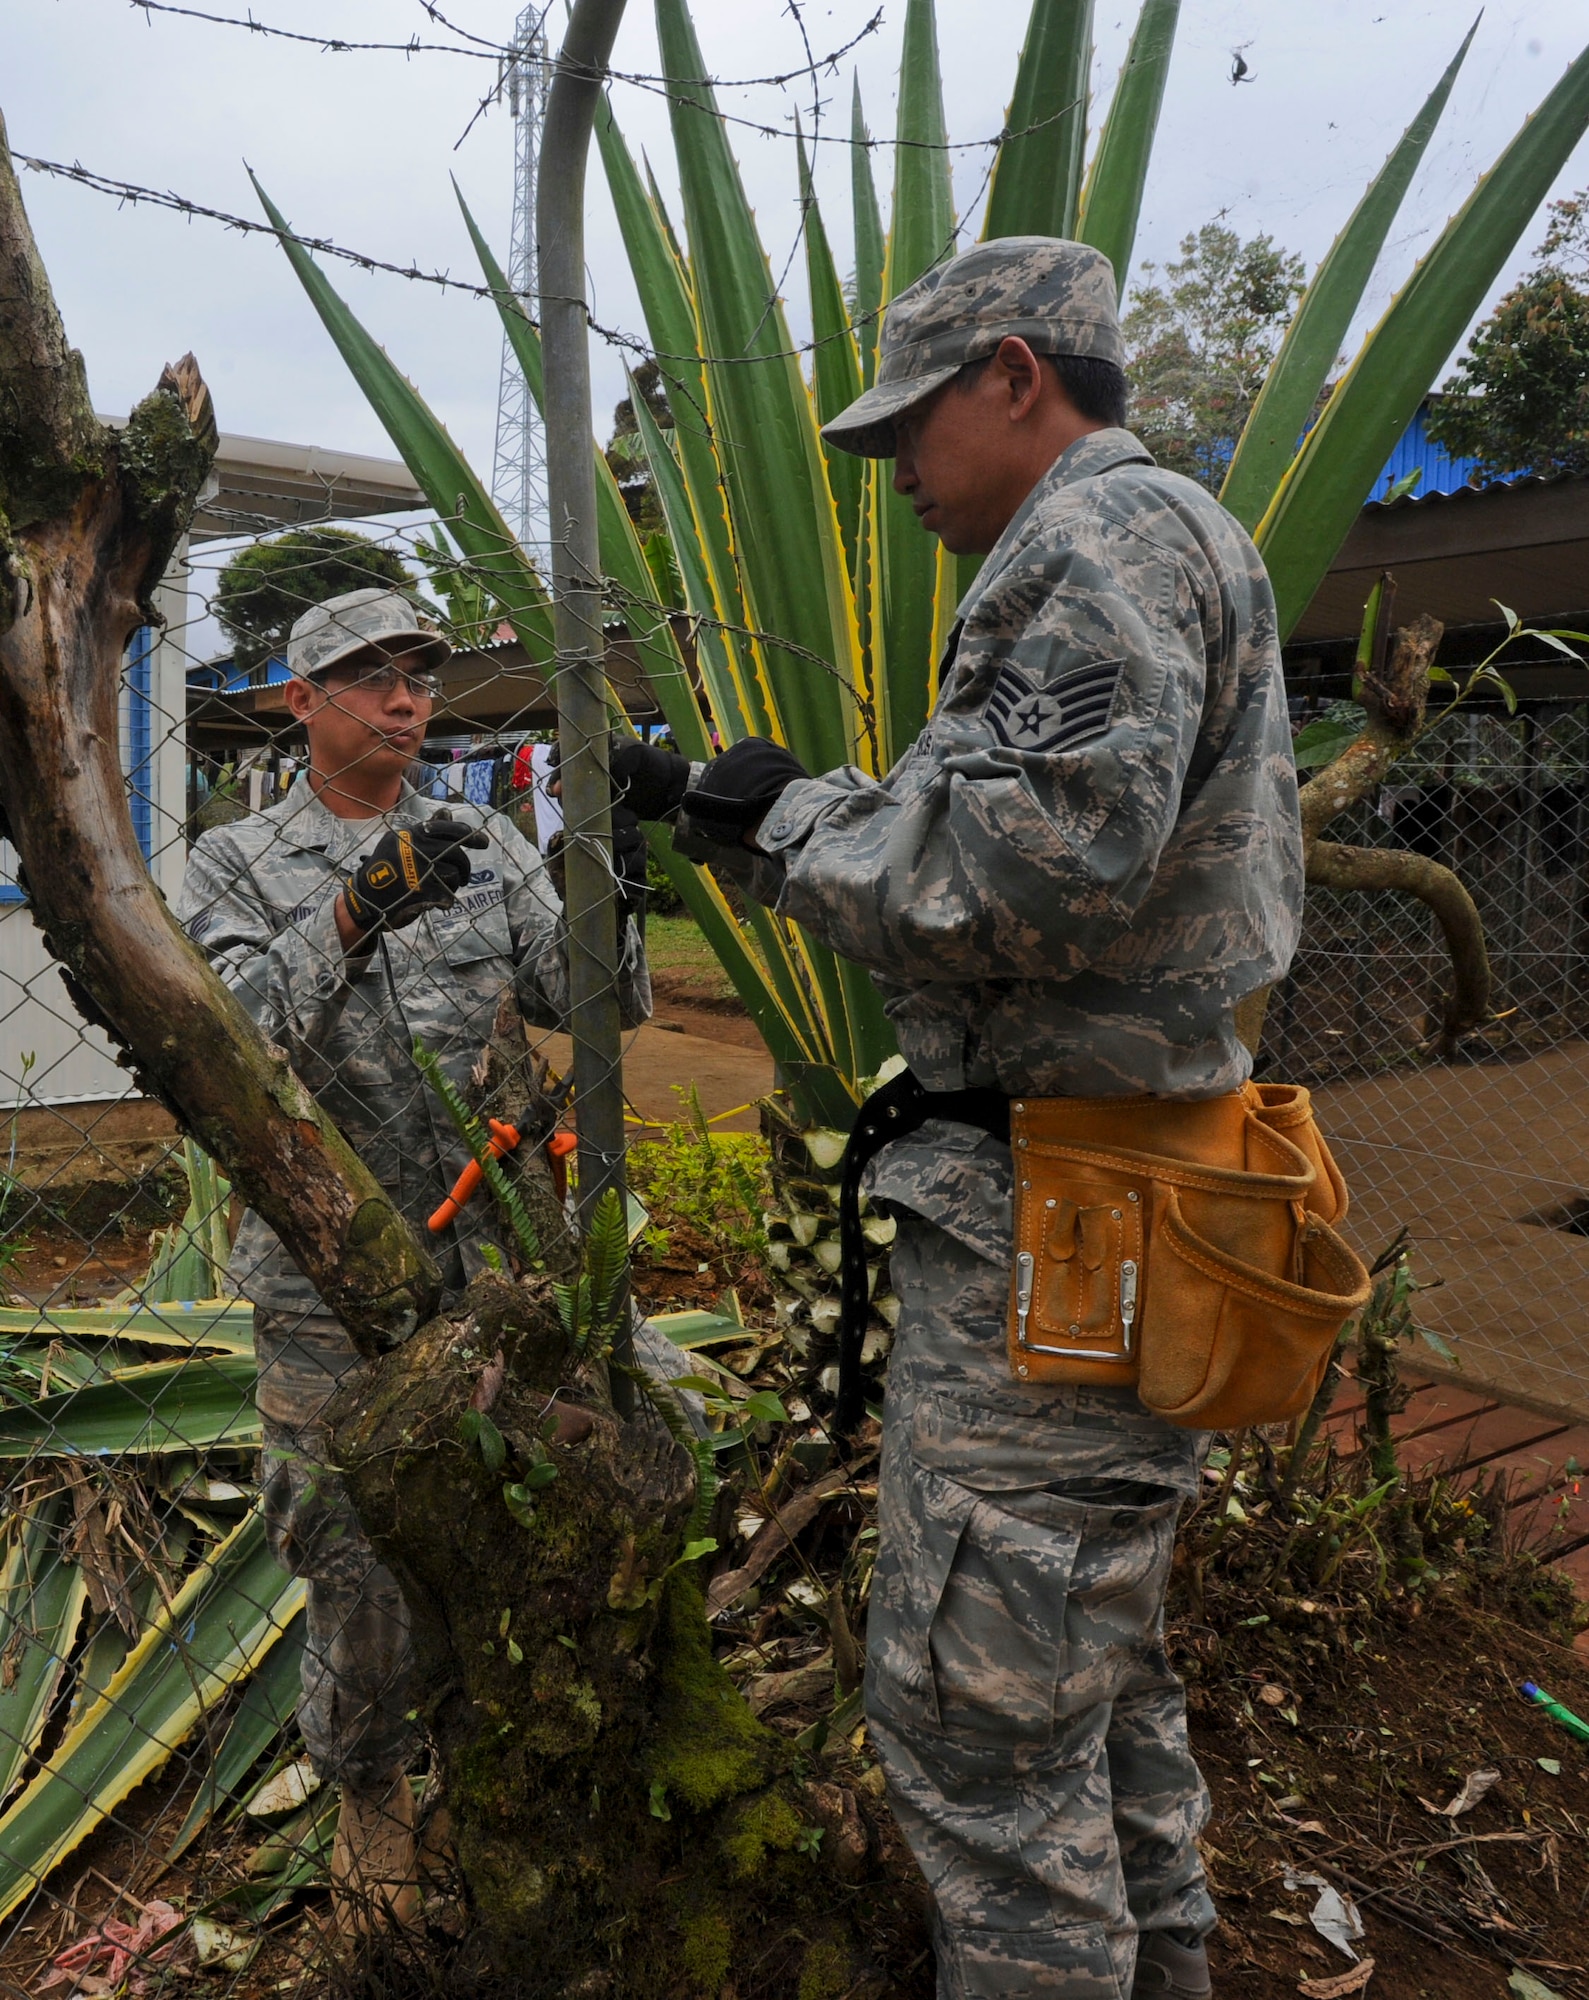 Senior Airman Paul Vidad, Hawaii Air National Guard 154th Civil Engineer Squadron engineering assistant, left, and Staff Sgt. Chris Aurio, Hawaii Air National Guard 154th Civil Engineer Squadron heating, ventilation and cooling journeyman, repair a fence at Togoba Secondary School in Mount Hagen, Papua New Guinea, as part of Pacific Unity 14-8. PACUNITY helps cultivate common bonds and fosters goodwill between the U.S. and regional nations through multi-lateral humanitarian assistance and civil military operations.  (U.S. Air Force photo by Tech. Sgt. Terri Paden/Released)                               